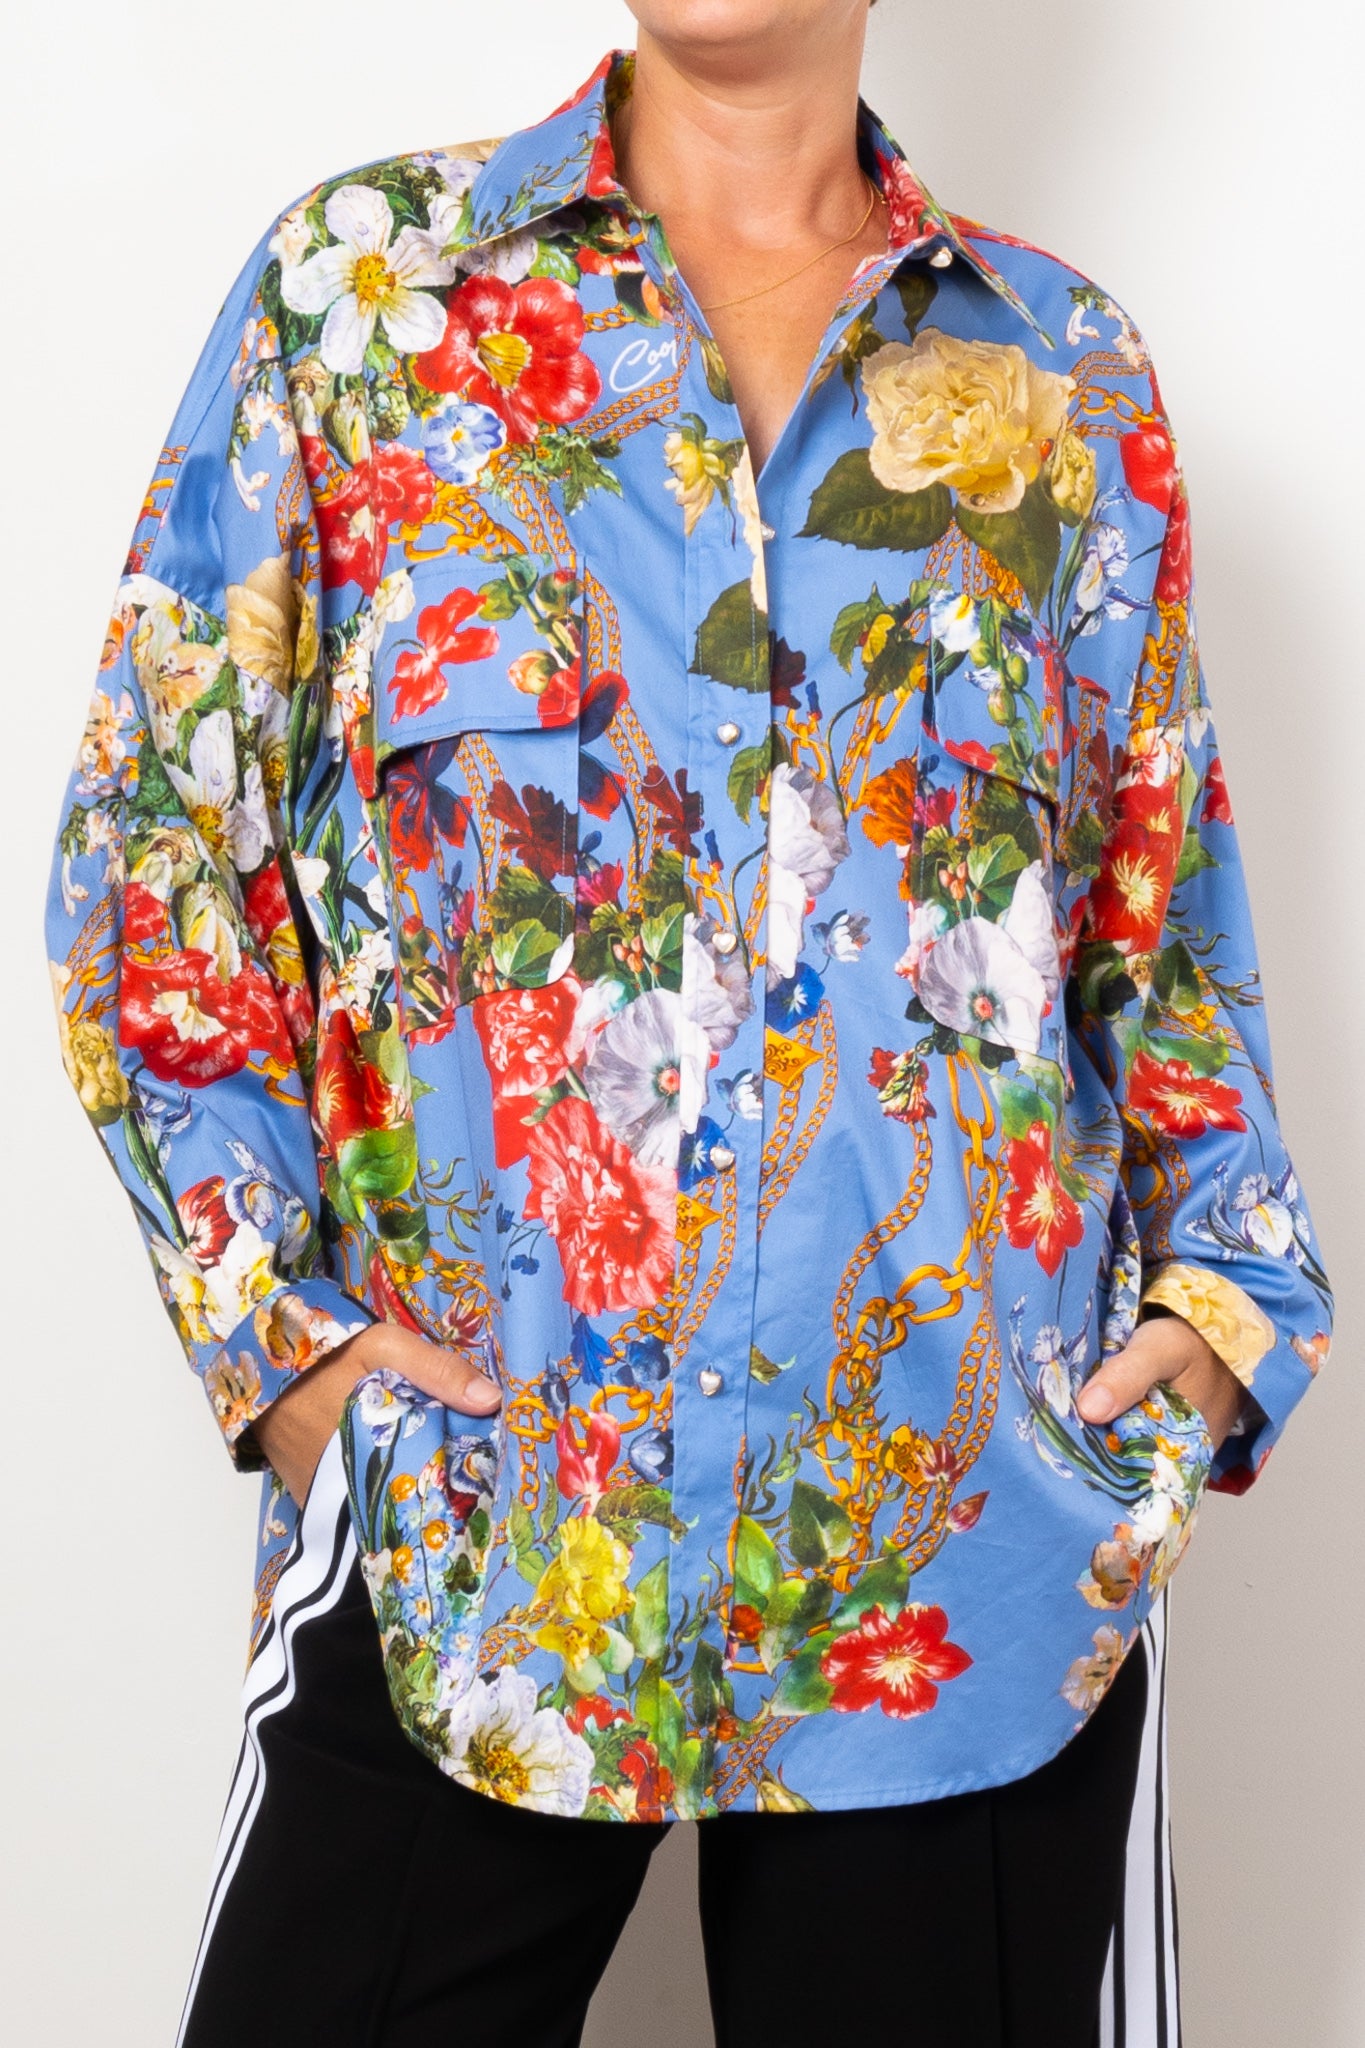 COOP by Trelise Cooper Come On Over Print Shirt